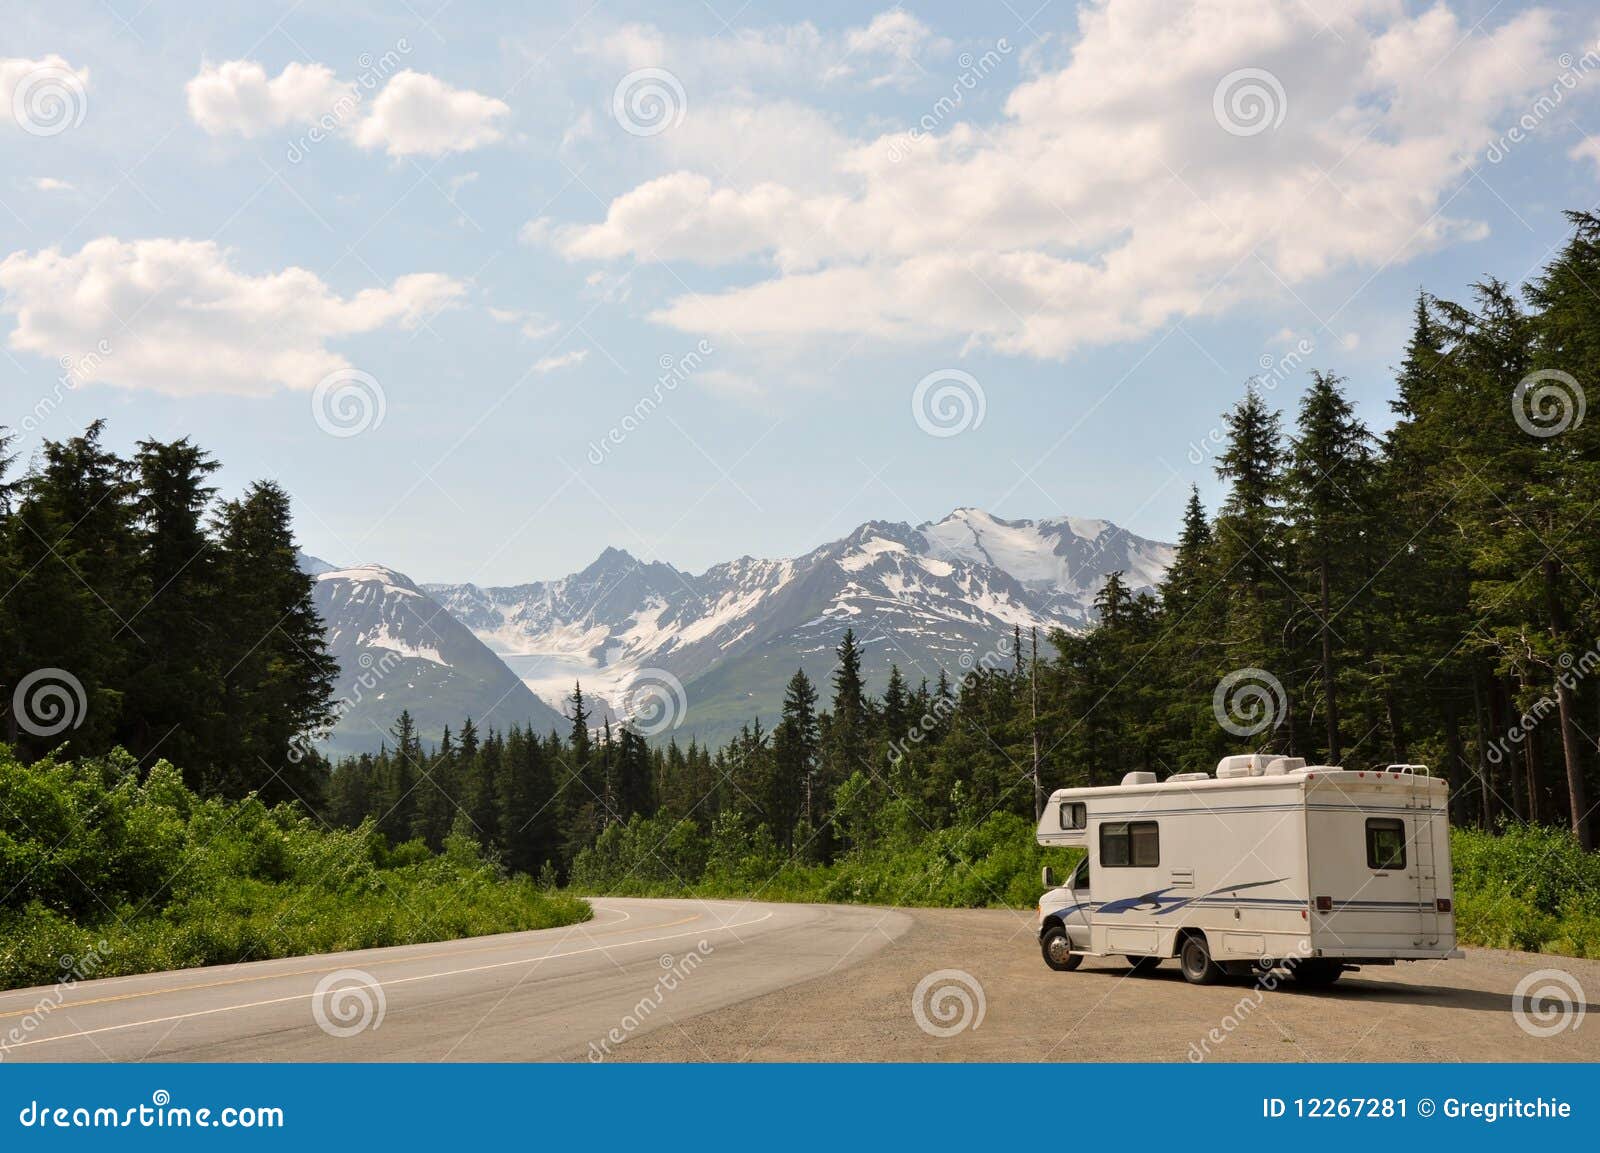 RV with an amazing view stock image. Image of view, camper - 12267281